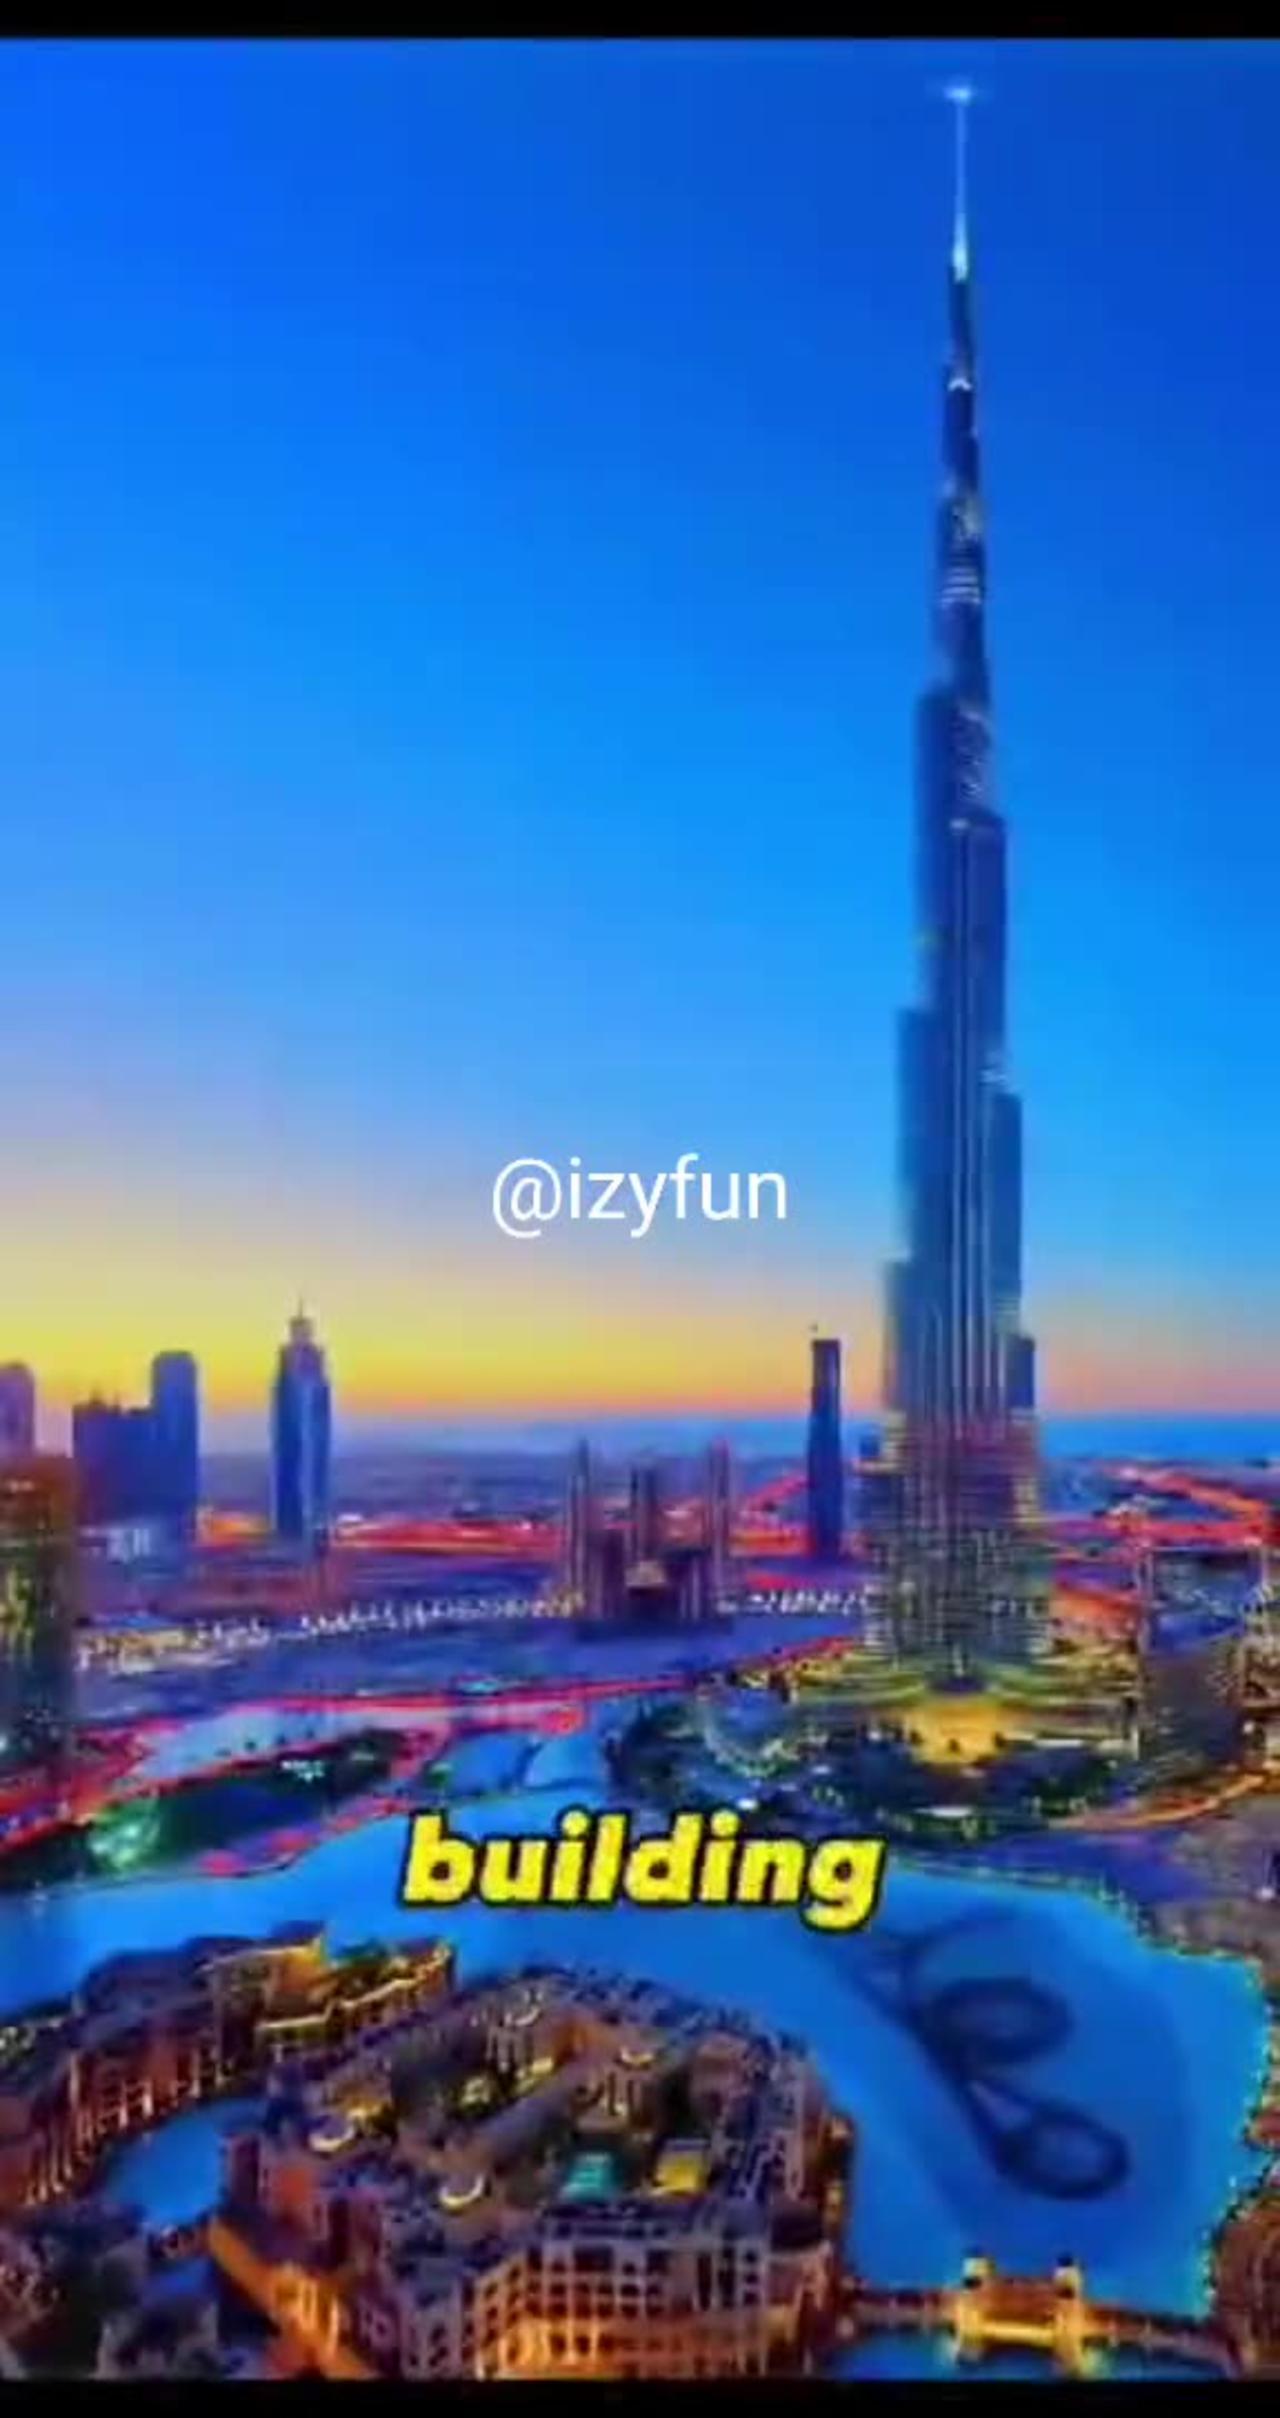 Tallest building in the world